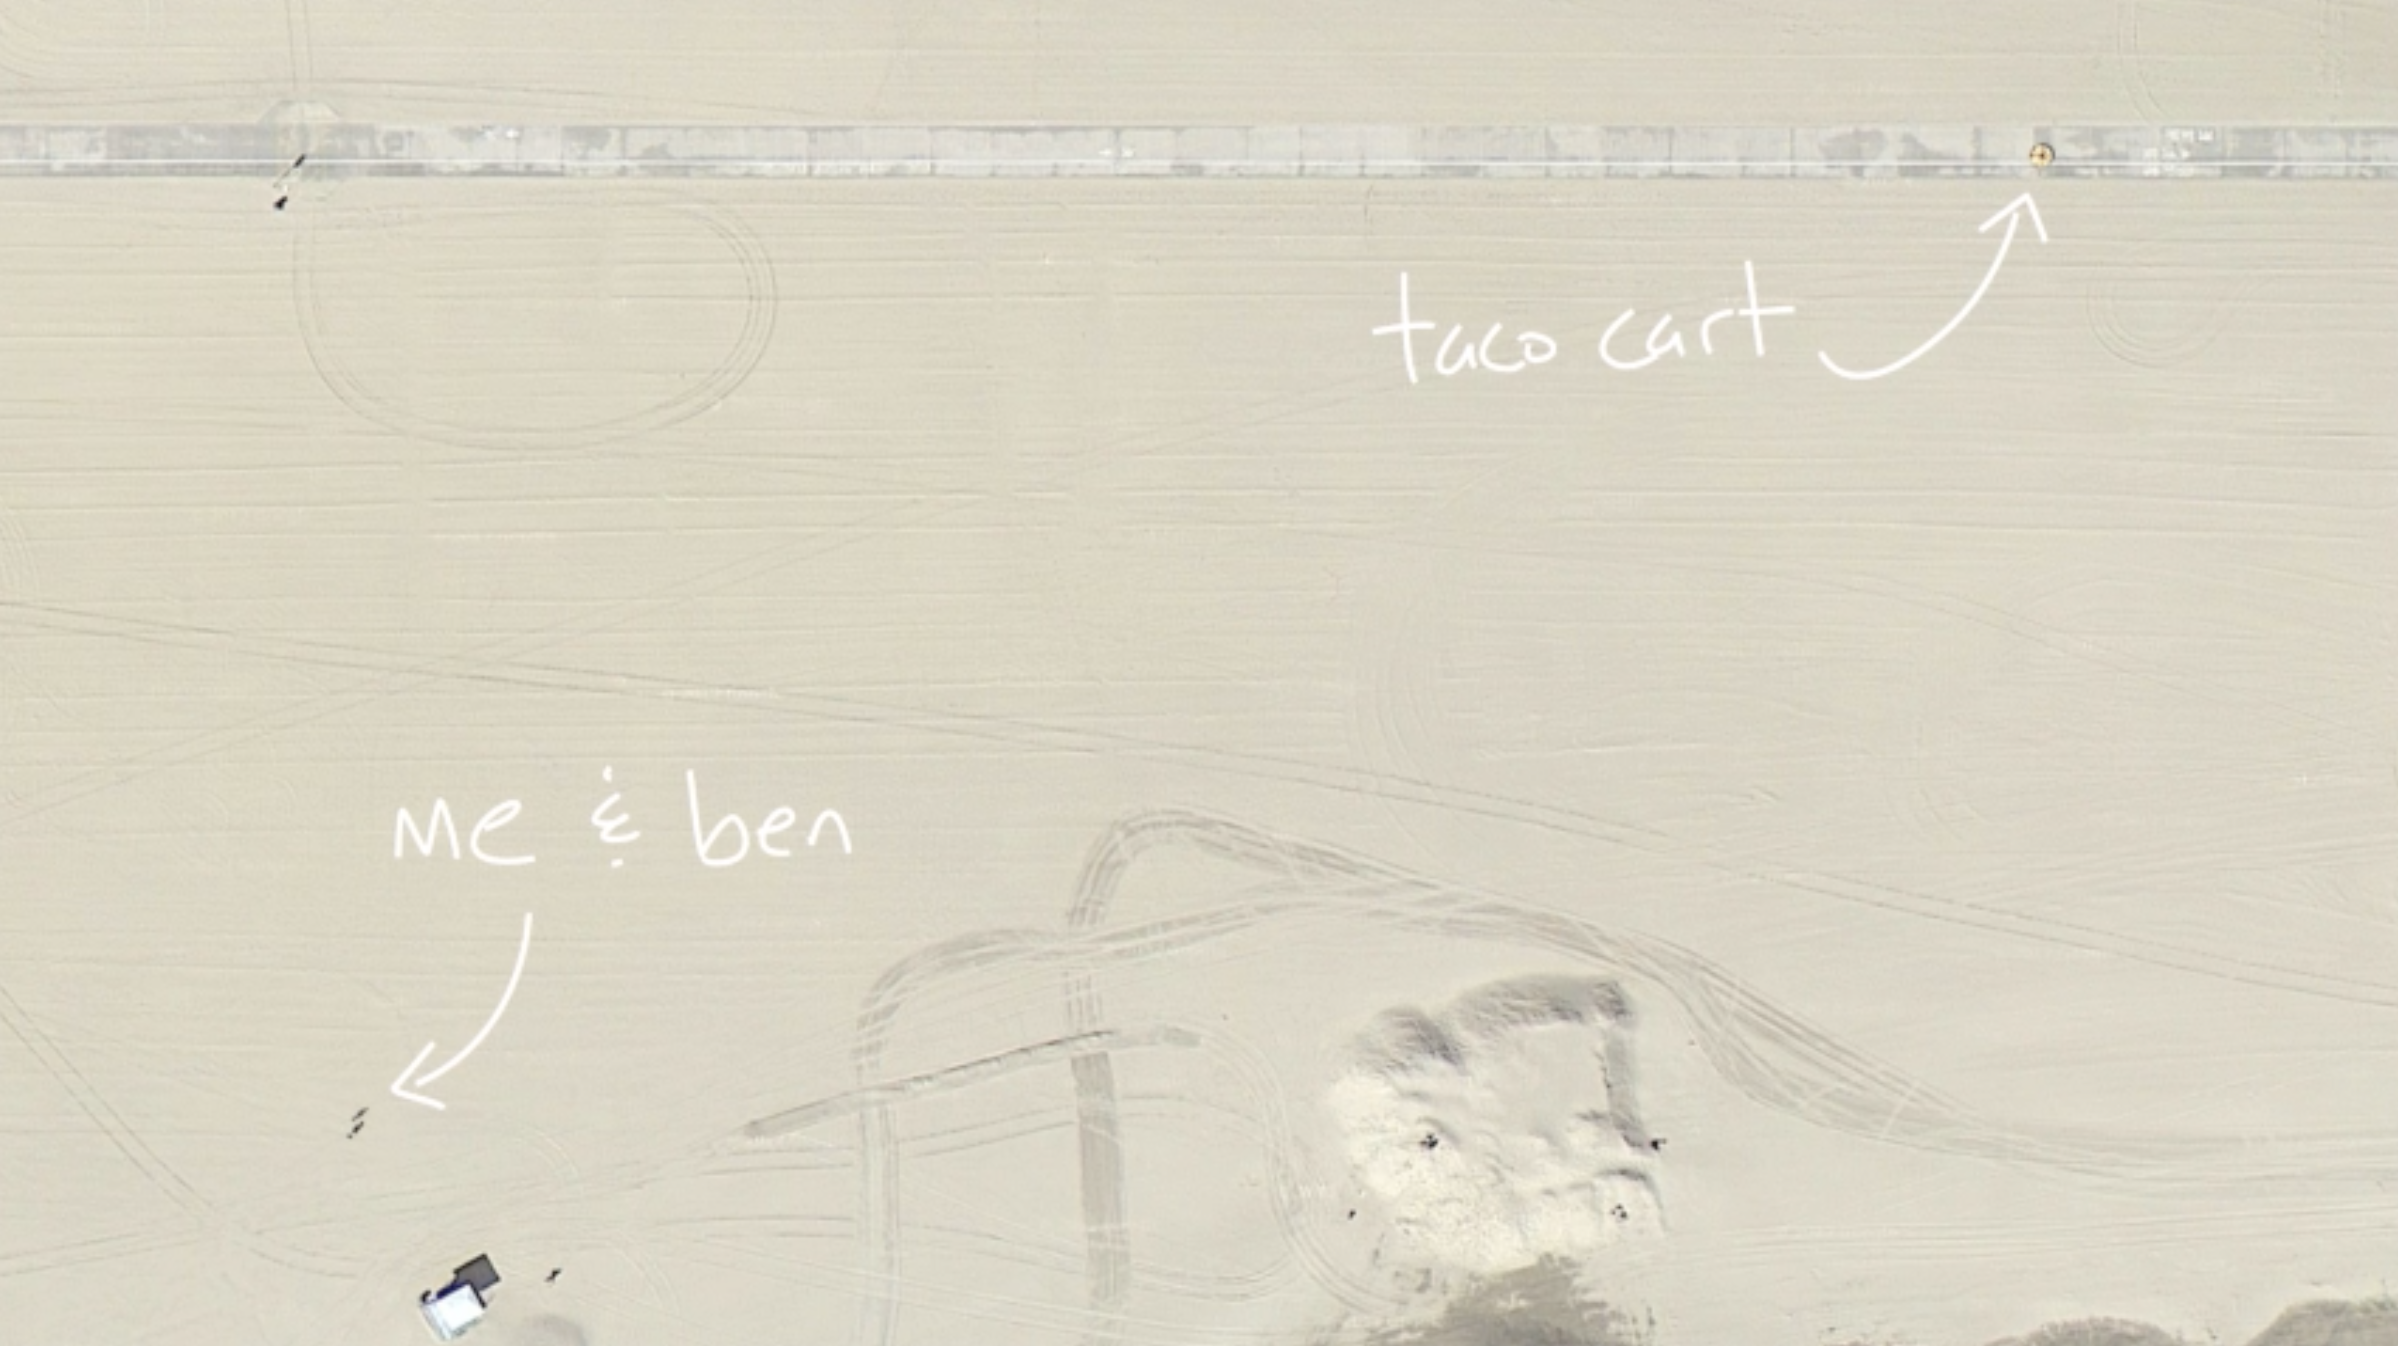 Screenshot of introductory image from the Taco Cart task. An overhead photo of a beach with the Taco Cart located on a boardwalk, and Dan and Ben on the beach near the water